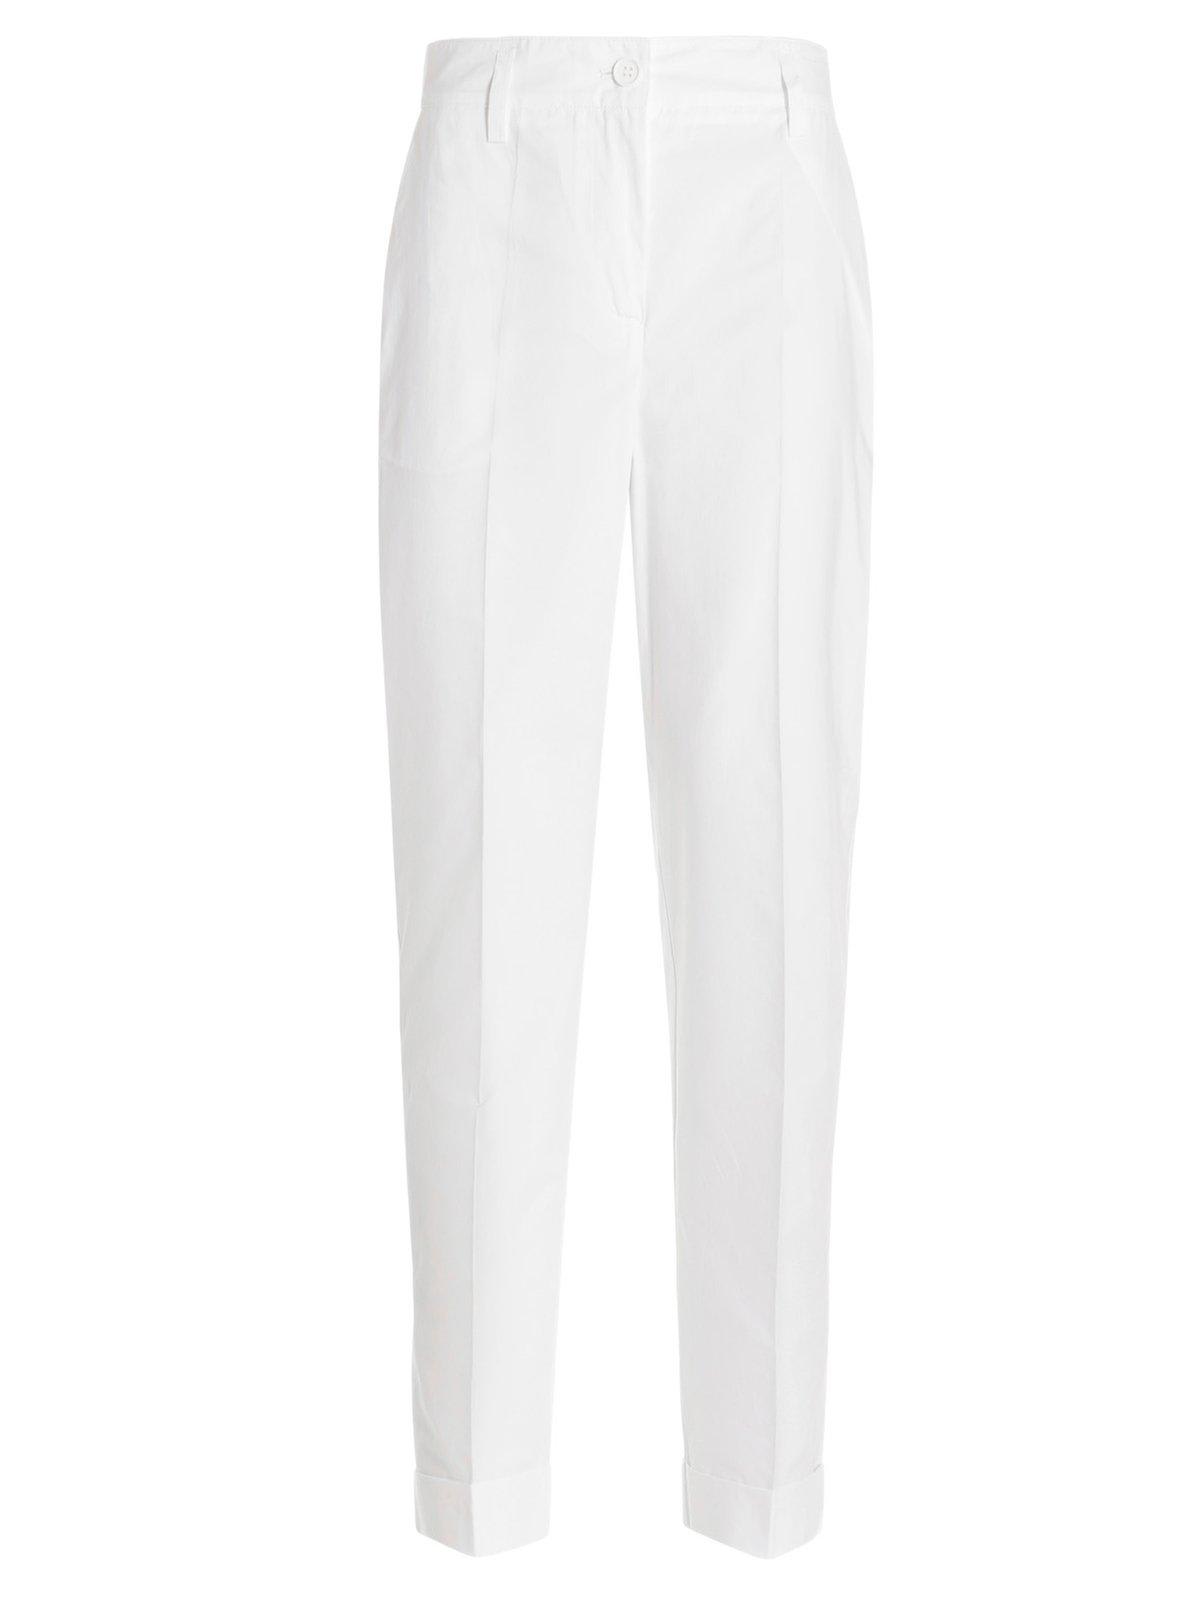 P.A.R.O.S.H SLIM FIT BUTTONED TROUSERS